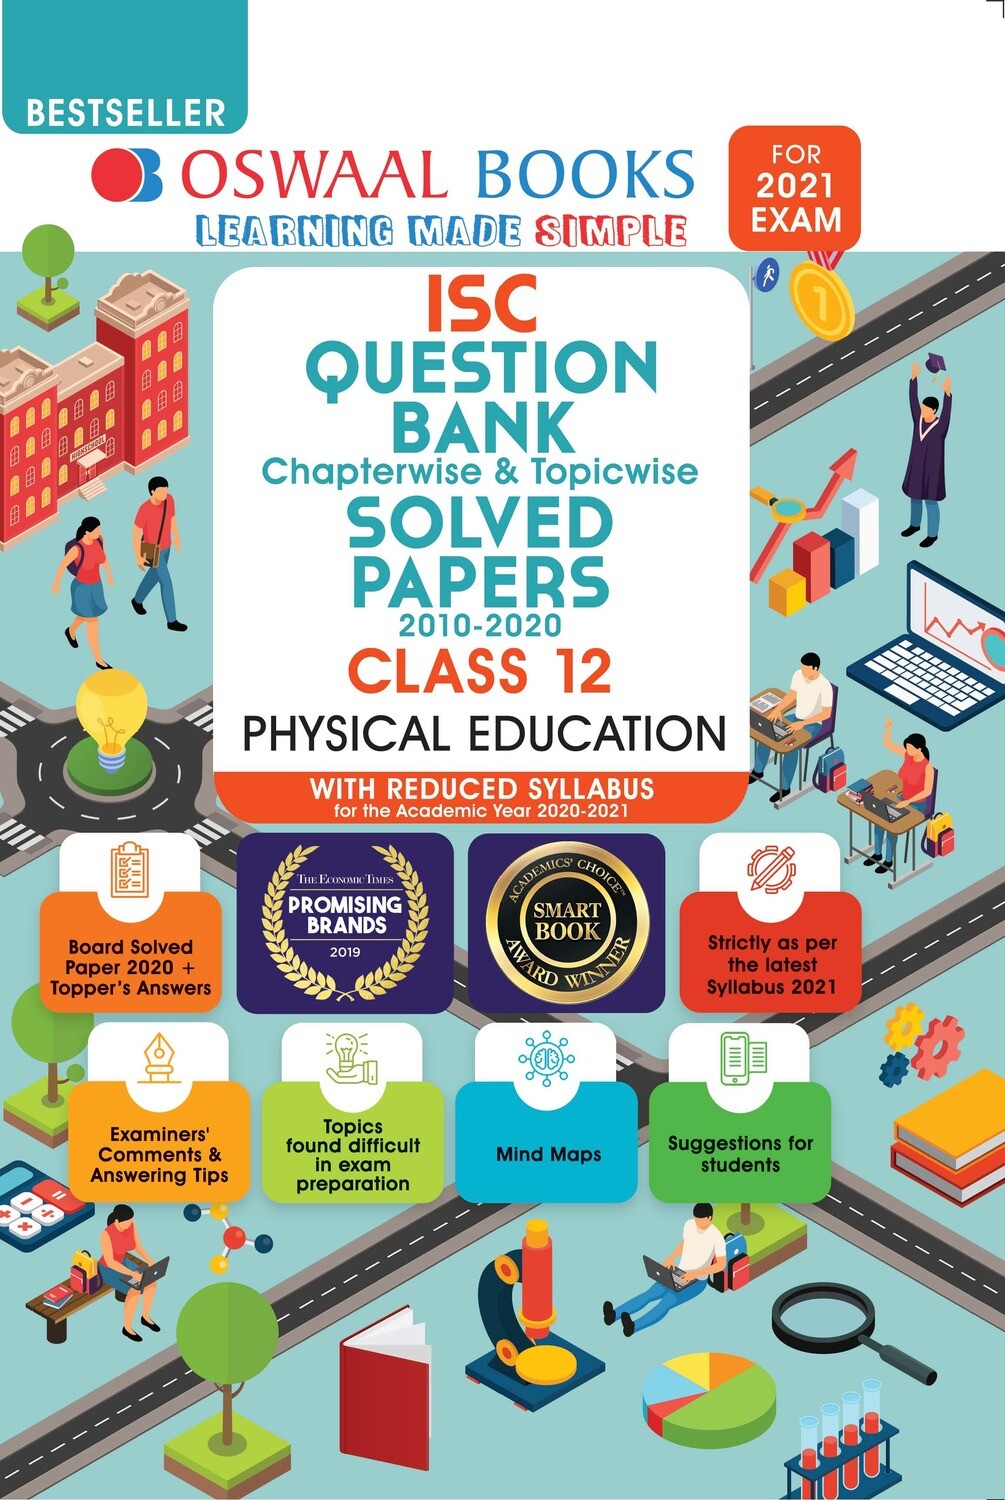 Buy e-book: Oswaal ISC Question Bank Chapterwise & Topicwise Solved Papers, Physical Education, Class 12 (Reduce